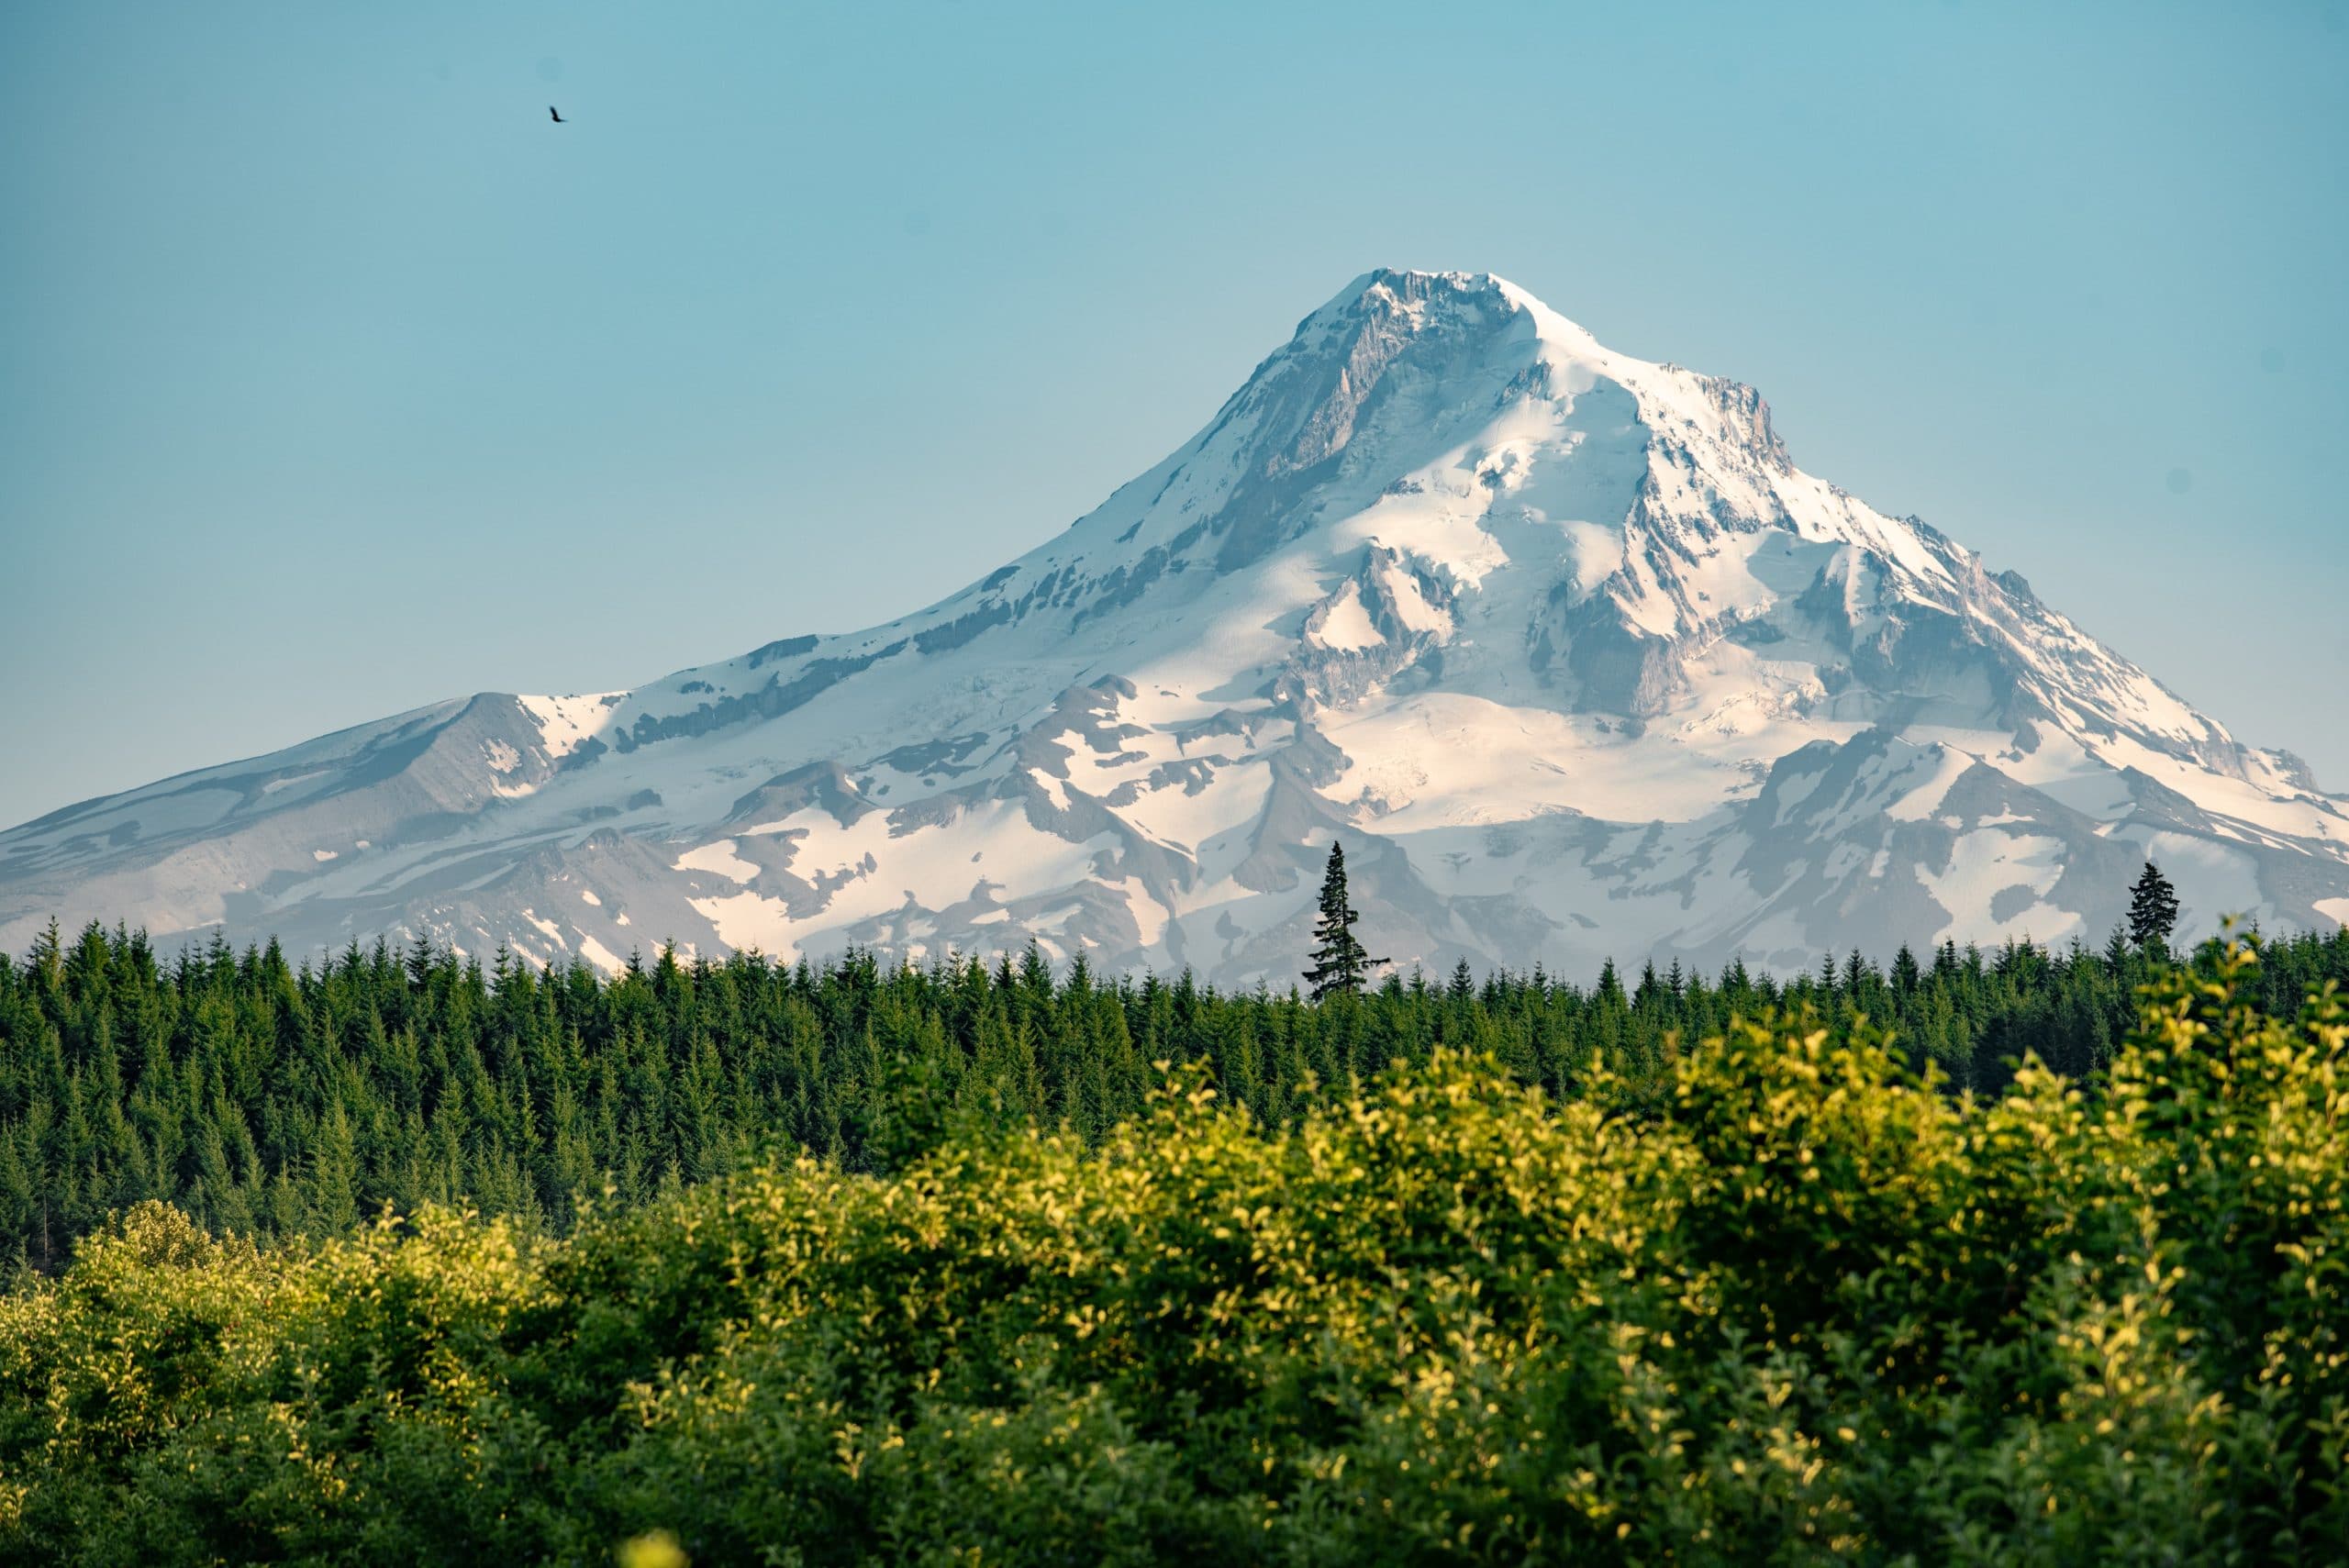 Mt Hood in background with evergreens flowers in foreground